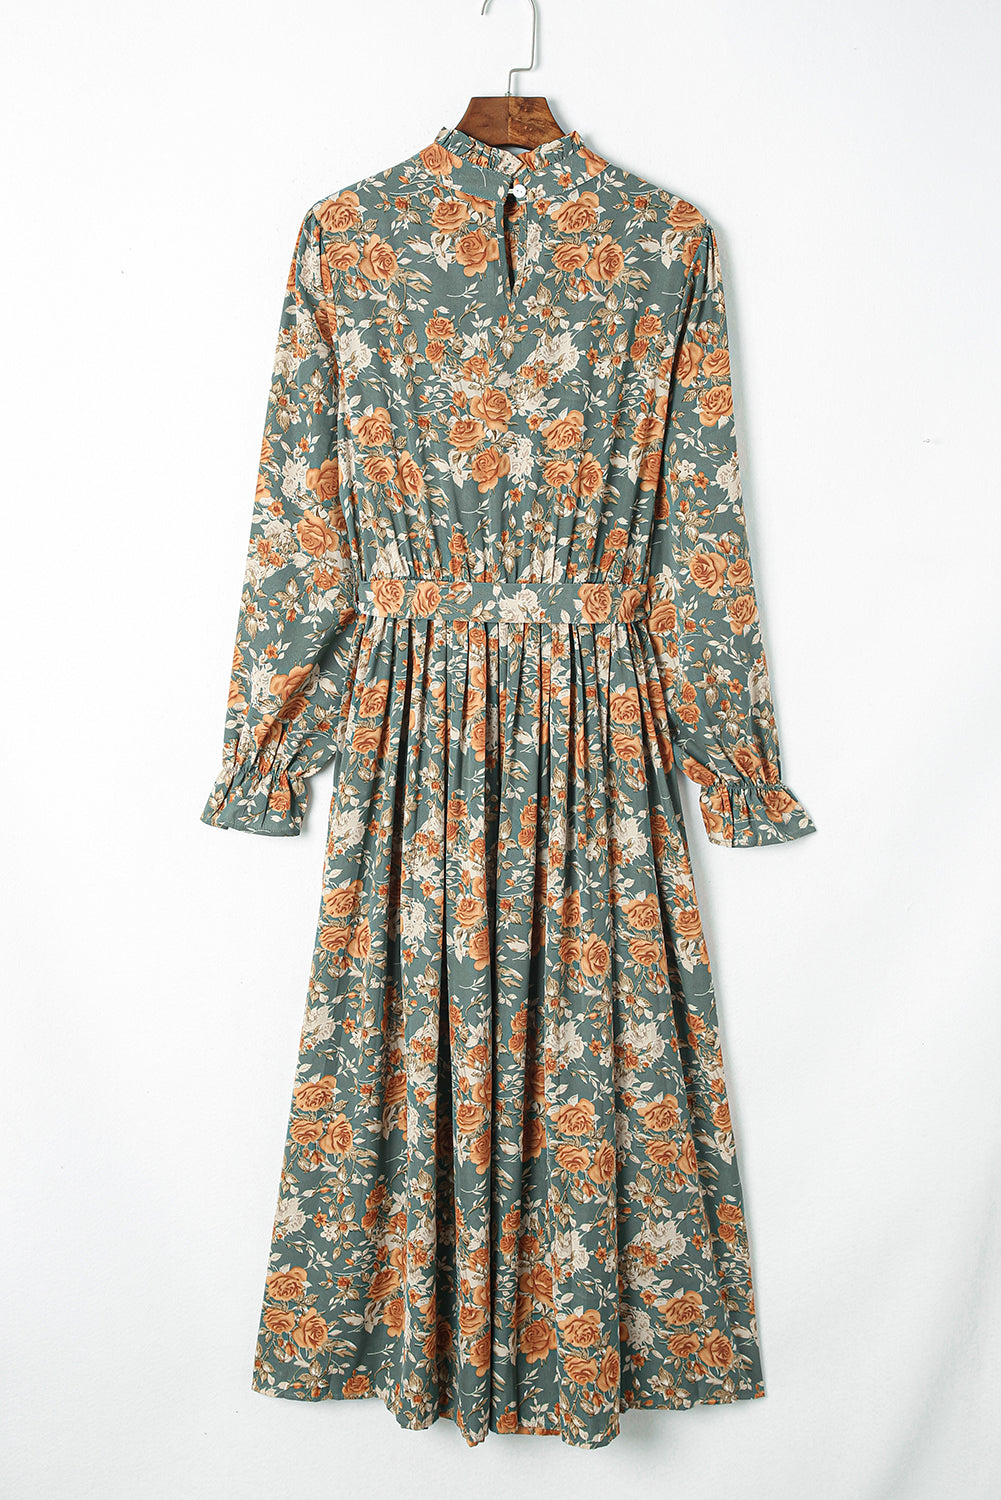 Green Pleated Long Sleeve Maxi Floral Dress with Tie Floral Dresses JT's Designer Fashion